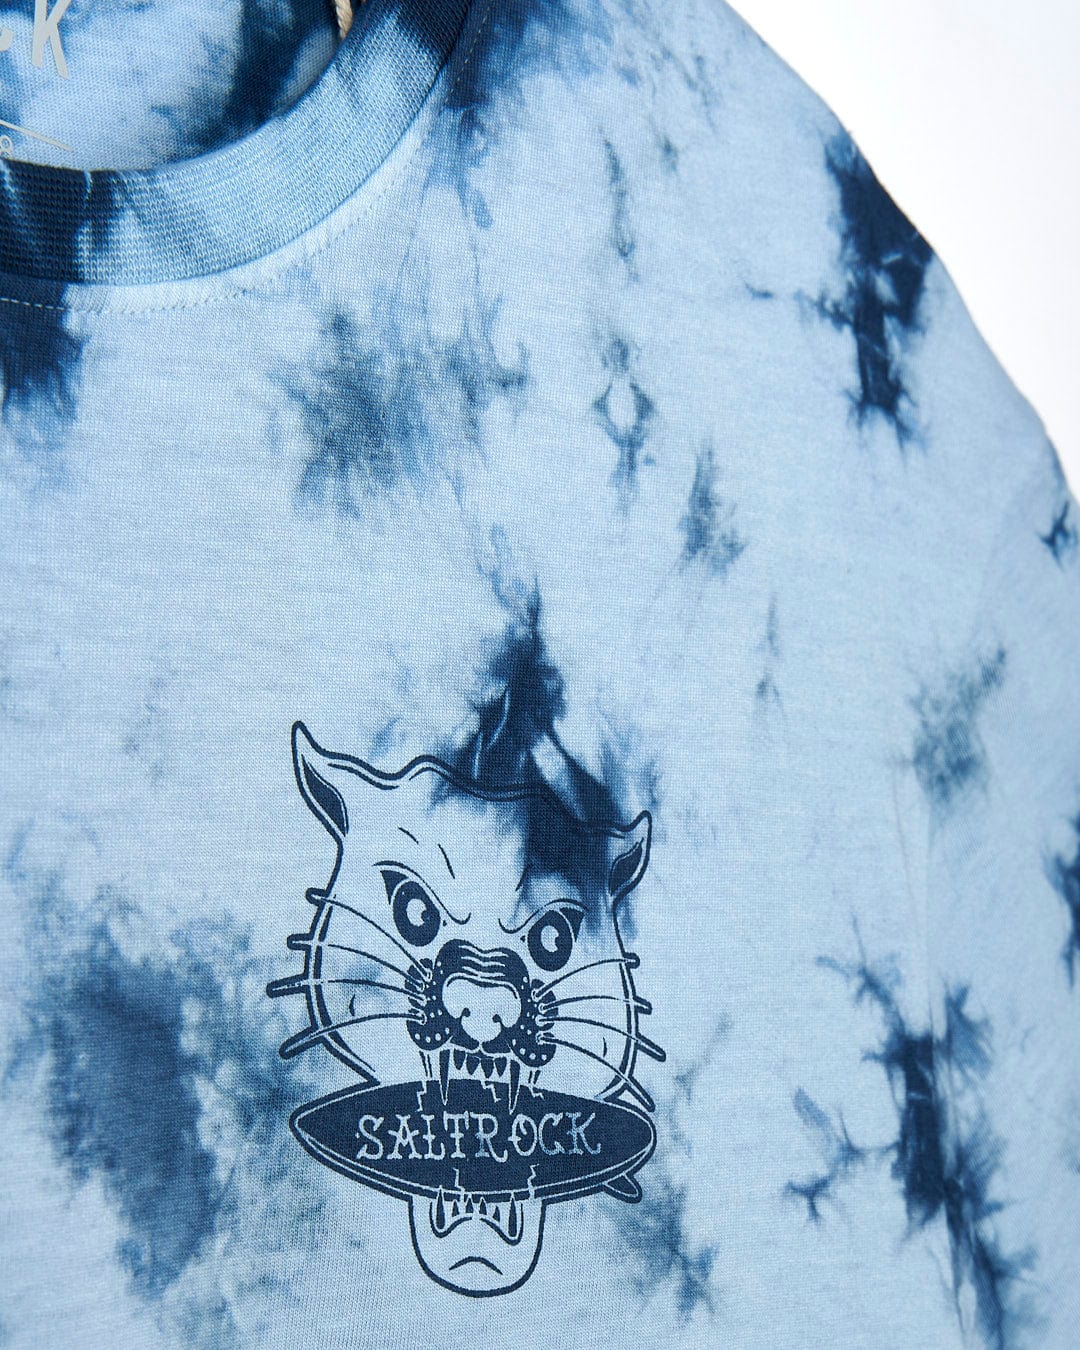 A Saltrock Purfect Wave - Mens Tie Dye Short Sleeve T-shirt - Light Blue with a cat on it.